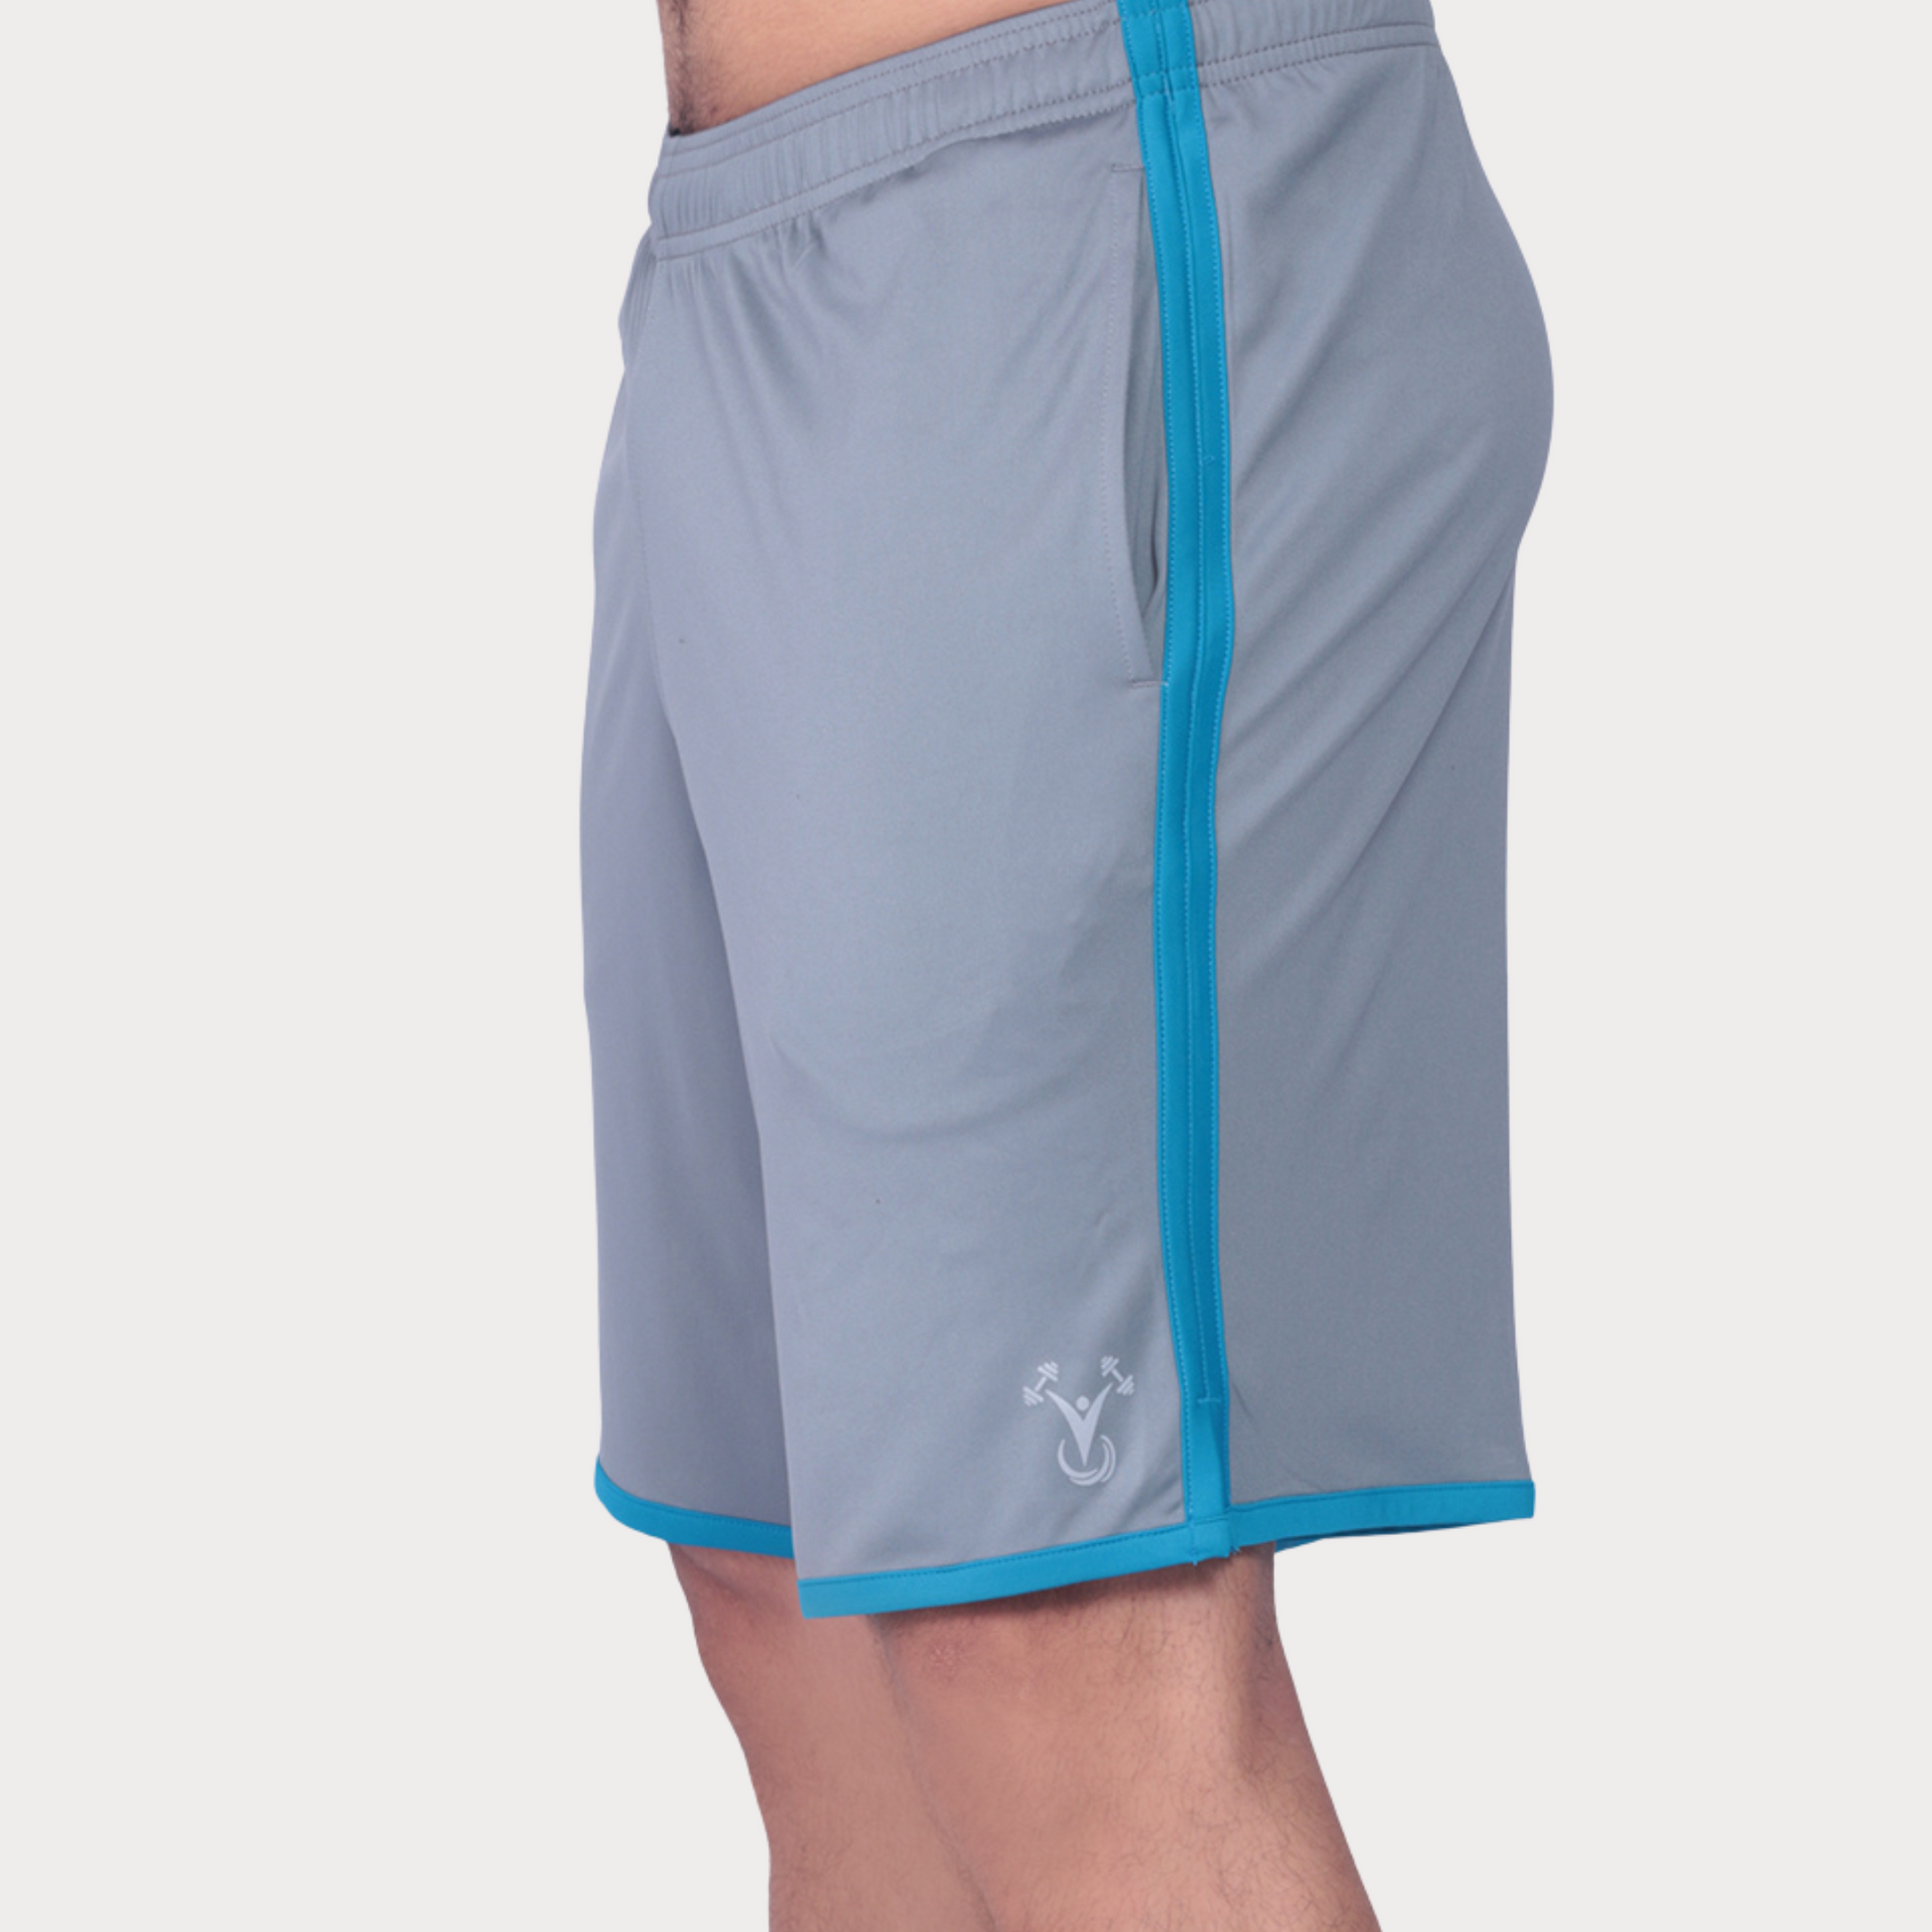 Shorts Activewear / Sportswear - Men's Classic Loose Fit Shorts - S / Carbon Underwater - Outperformer